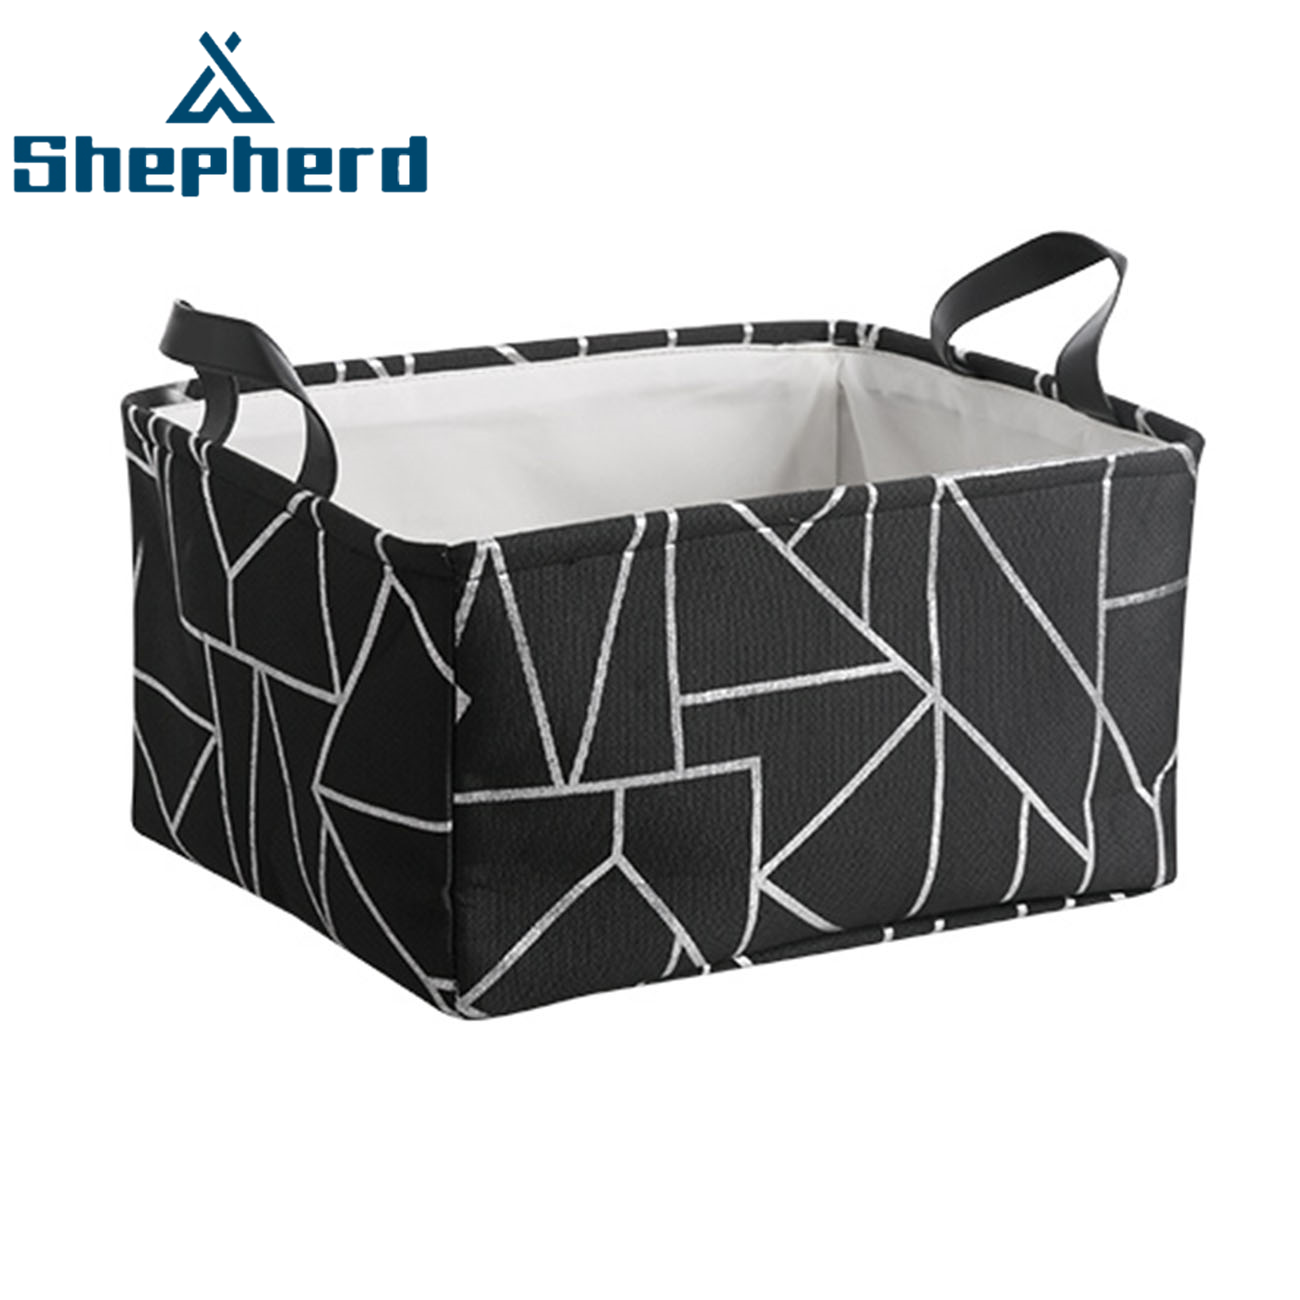 Shepherd Canvas Stacked Geometry Pattern Storage Basket with Handle